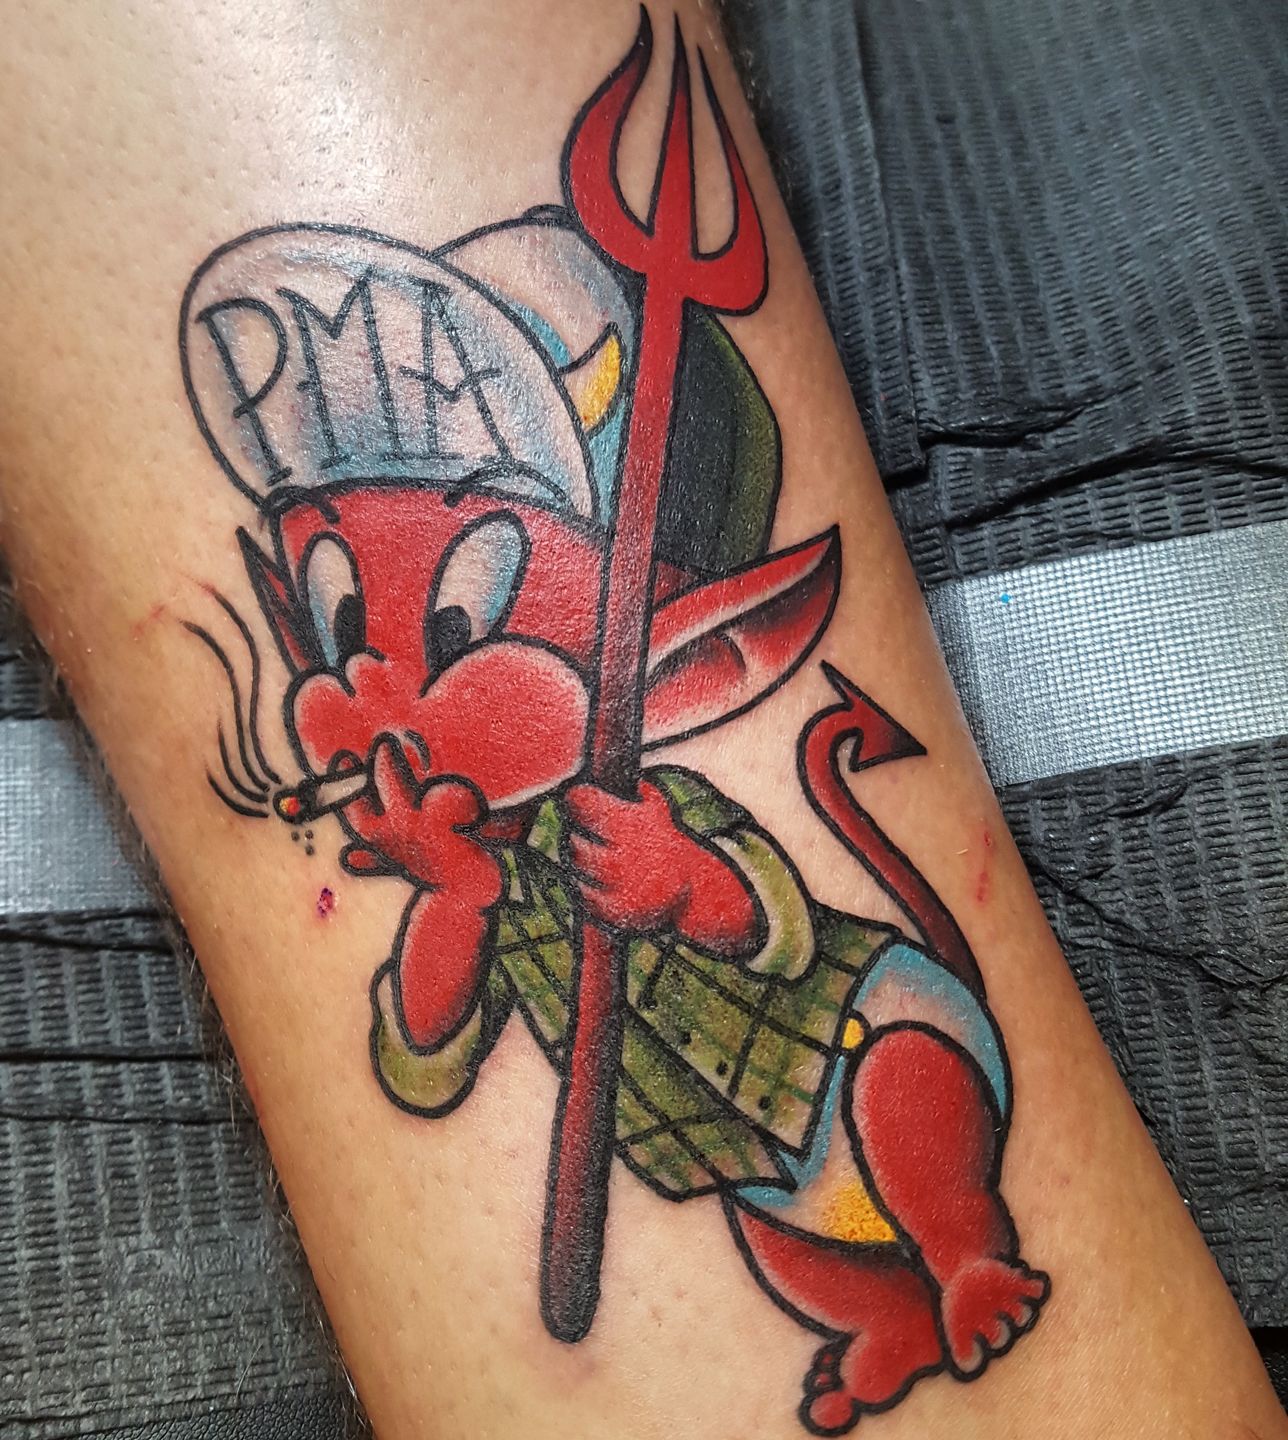 Little devil guy done by Victor @ Mantra Tattoo in Denver CO : r/tattoos